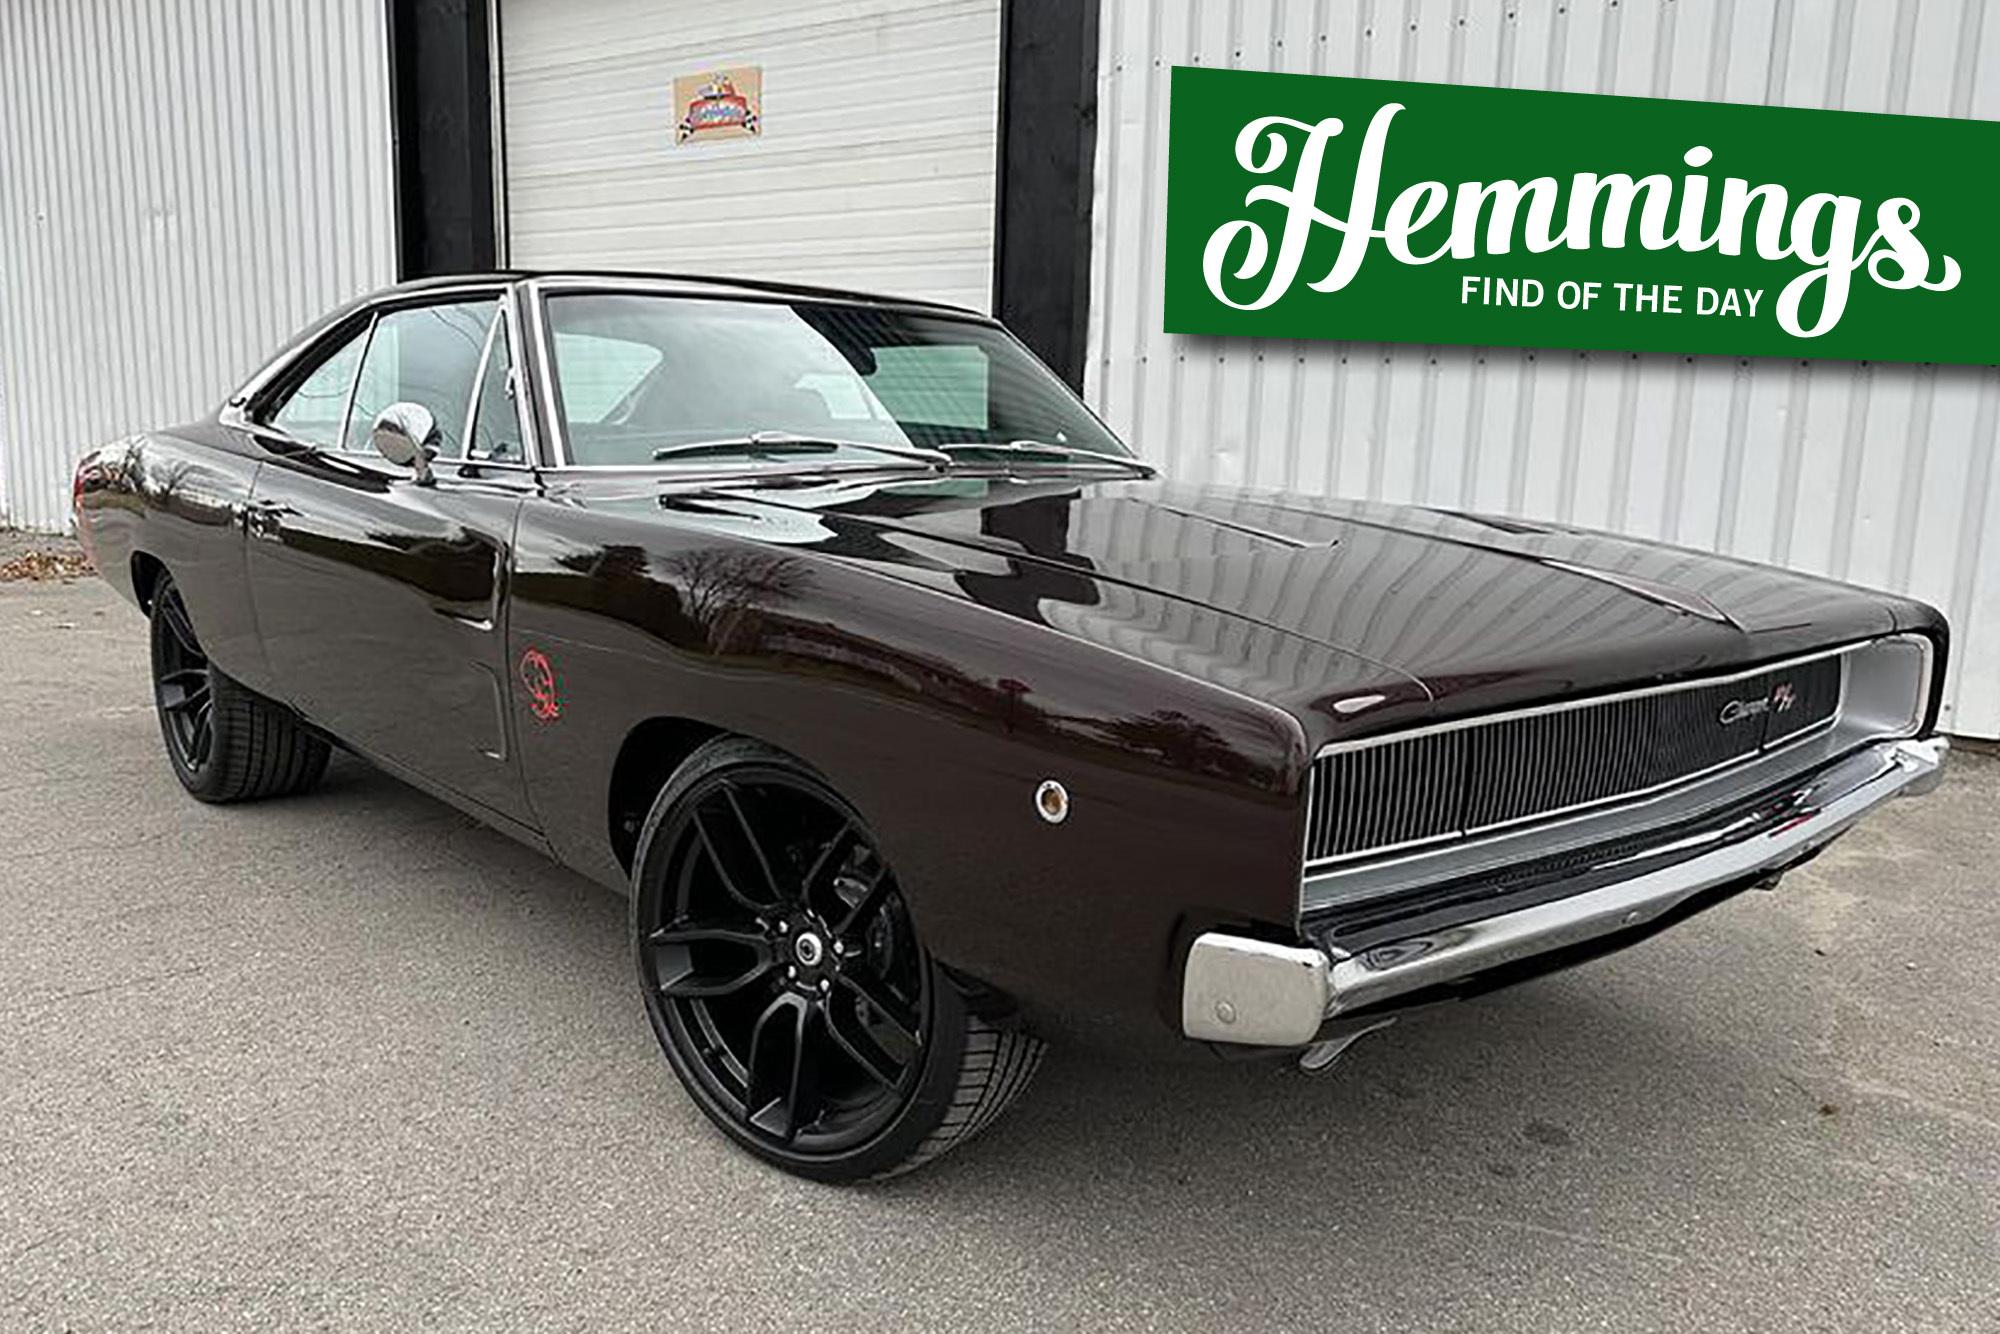 Where would a Hellephant crate Hemi be more at home than in a 1968 Dodge Charger?